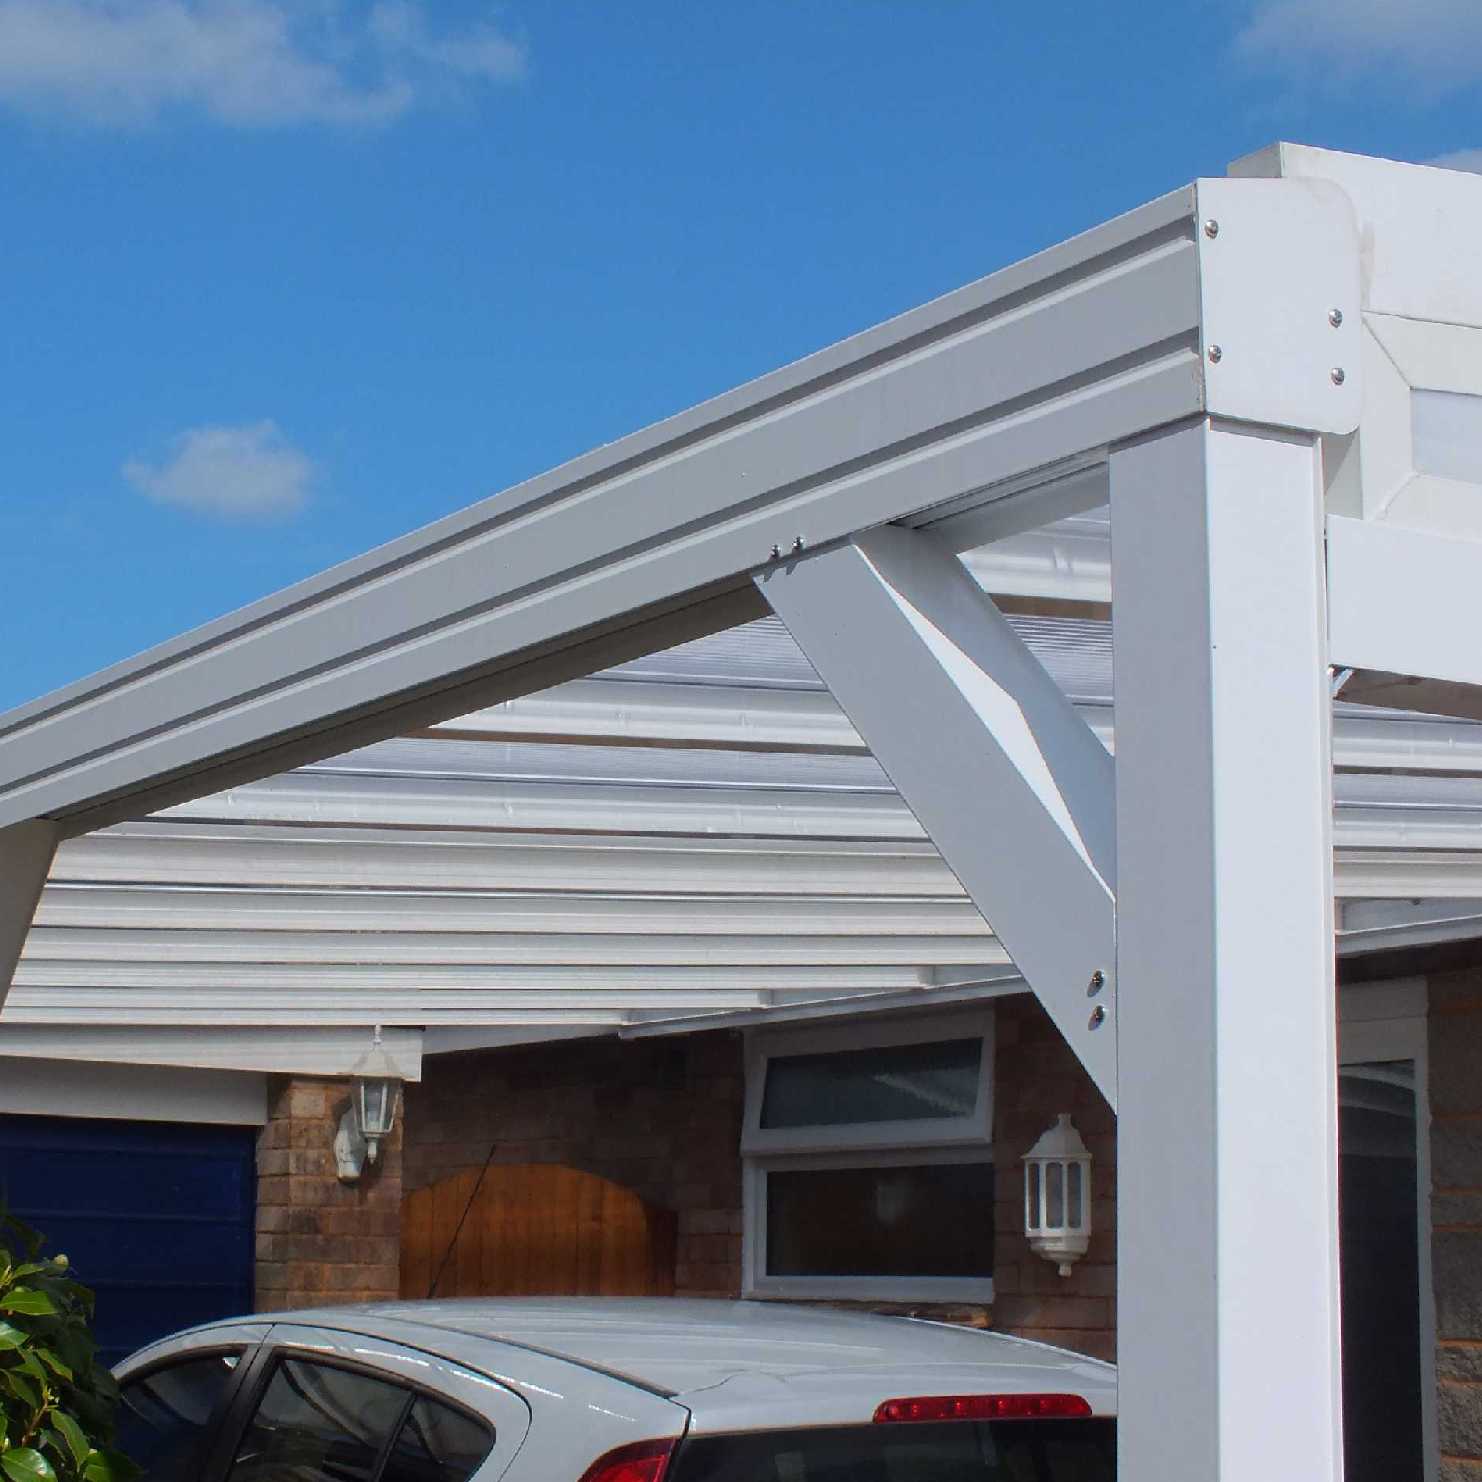 Great deals on Omega Smart Lean-To Canopy, White with 16mm Polycarbonate Glazing - 11.2m (W) x 4.5m (P), (5) Supporting Posts